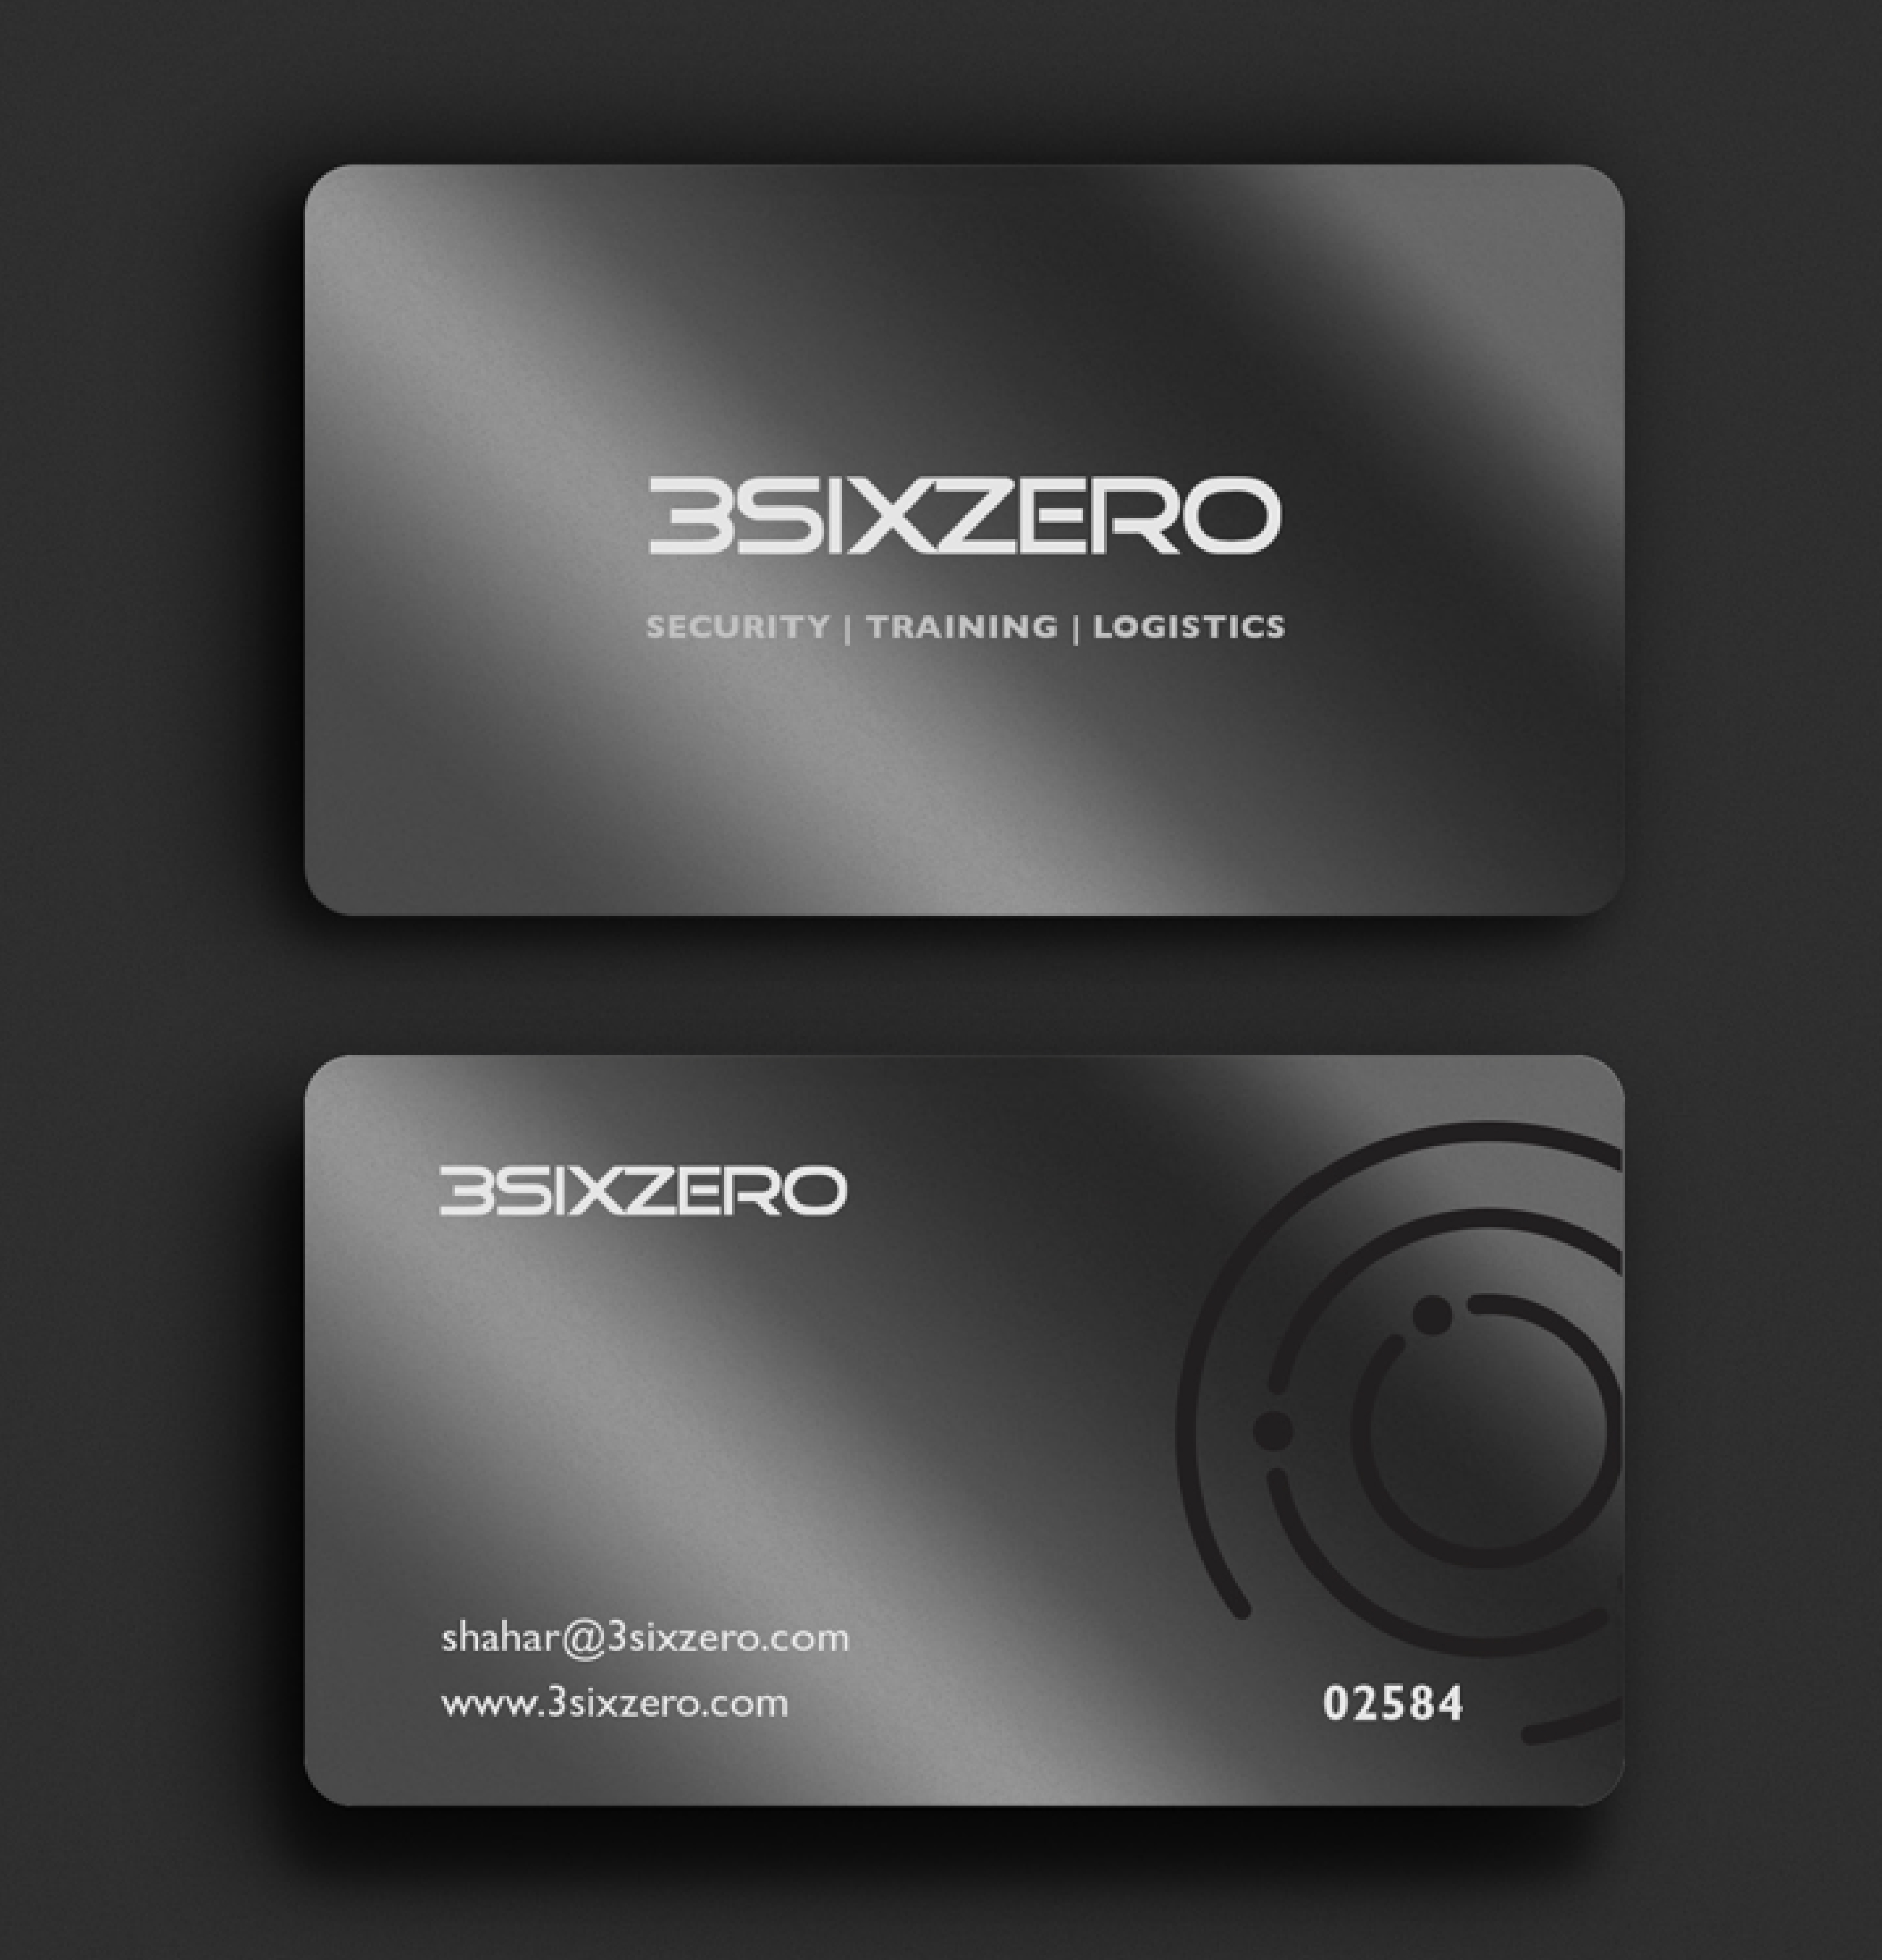 Branded collateral, a metal business card that was created for 3SIXZERO